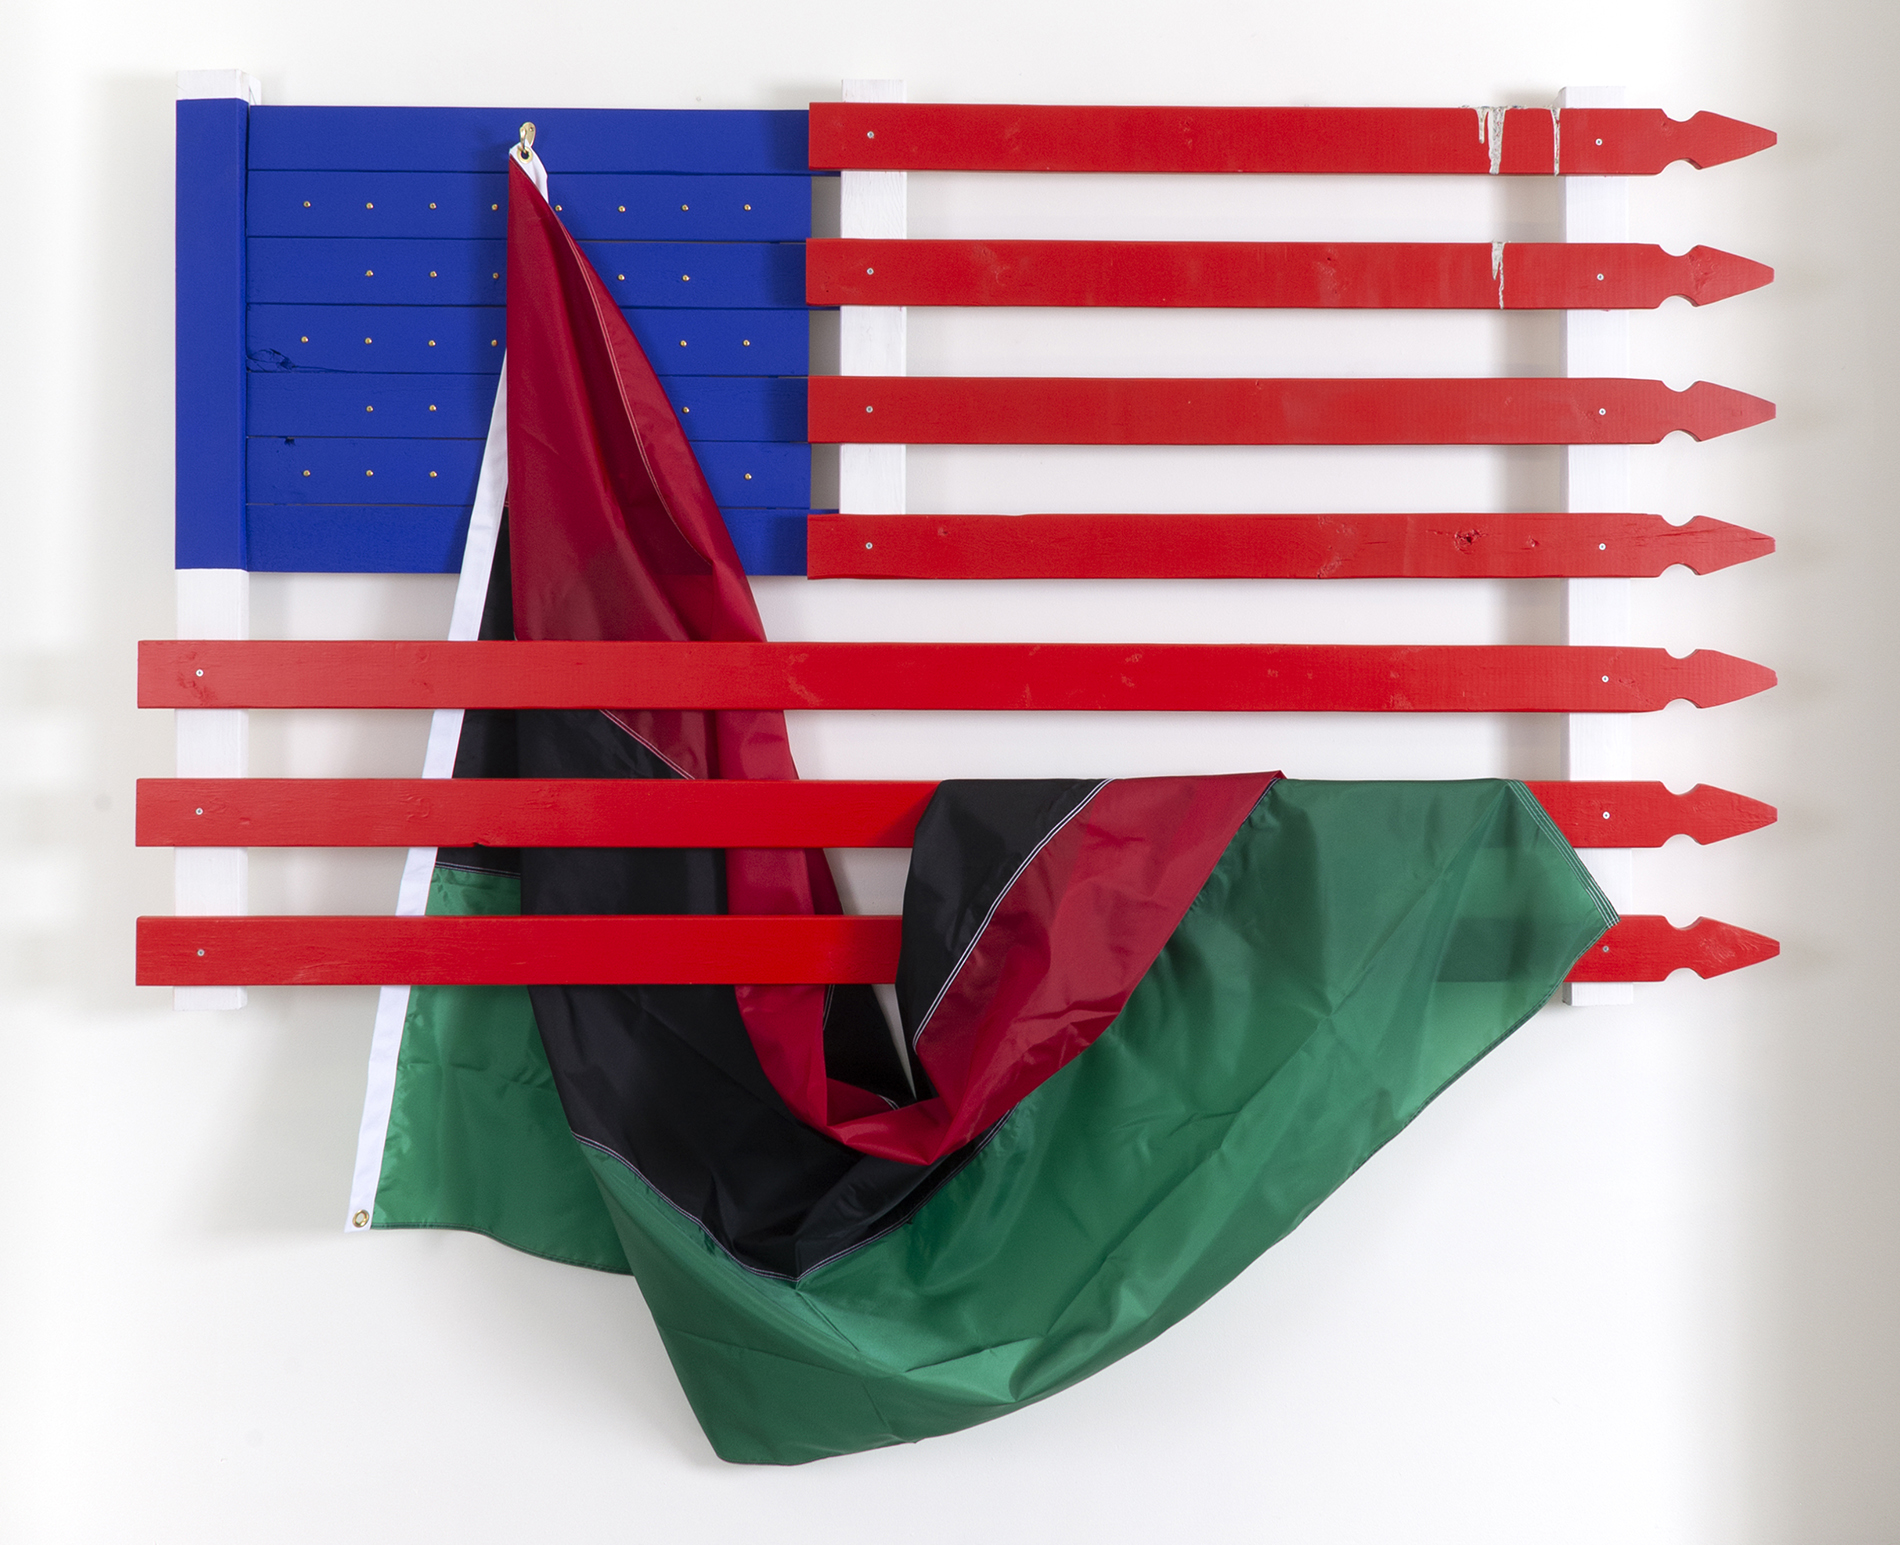 Aaron Coleman's, The Pieta, composed of an American flag made from painted picket fence slats. A pan-African flag hangs from the blue gound and drapes over the lower red stripe slats.